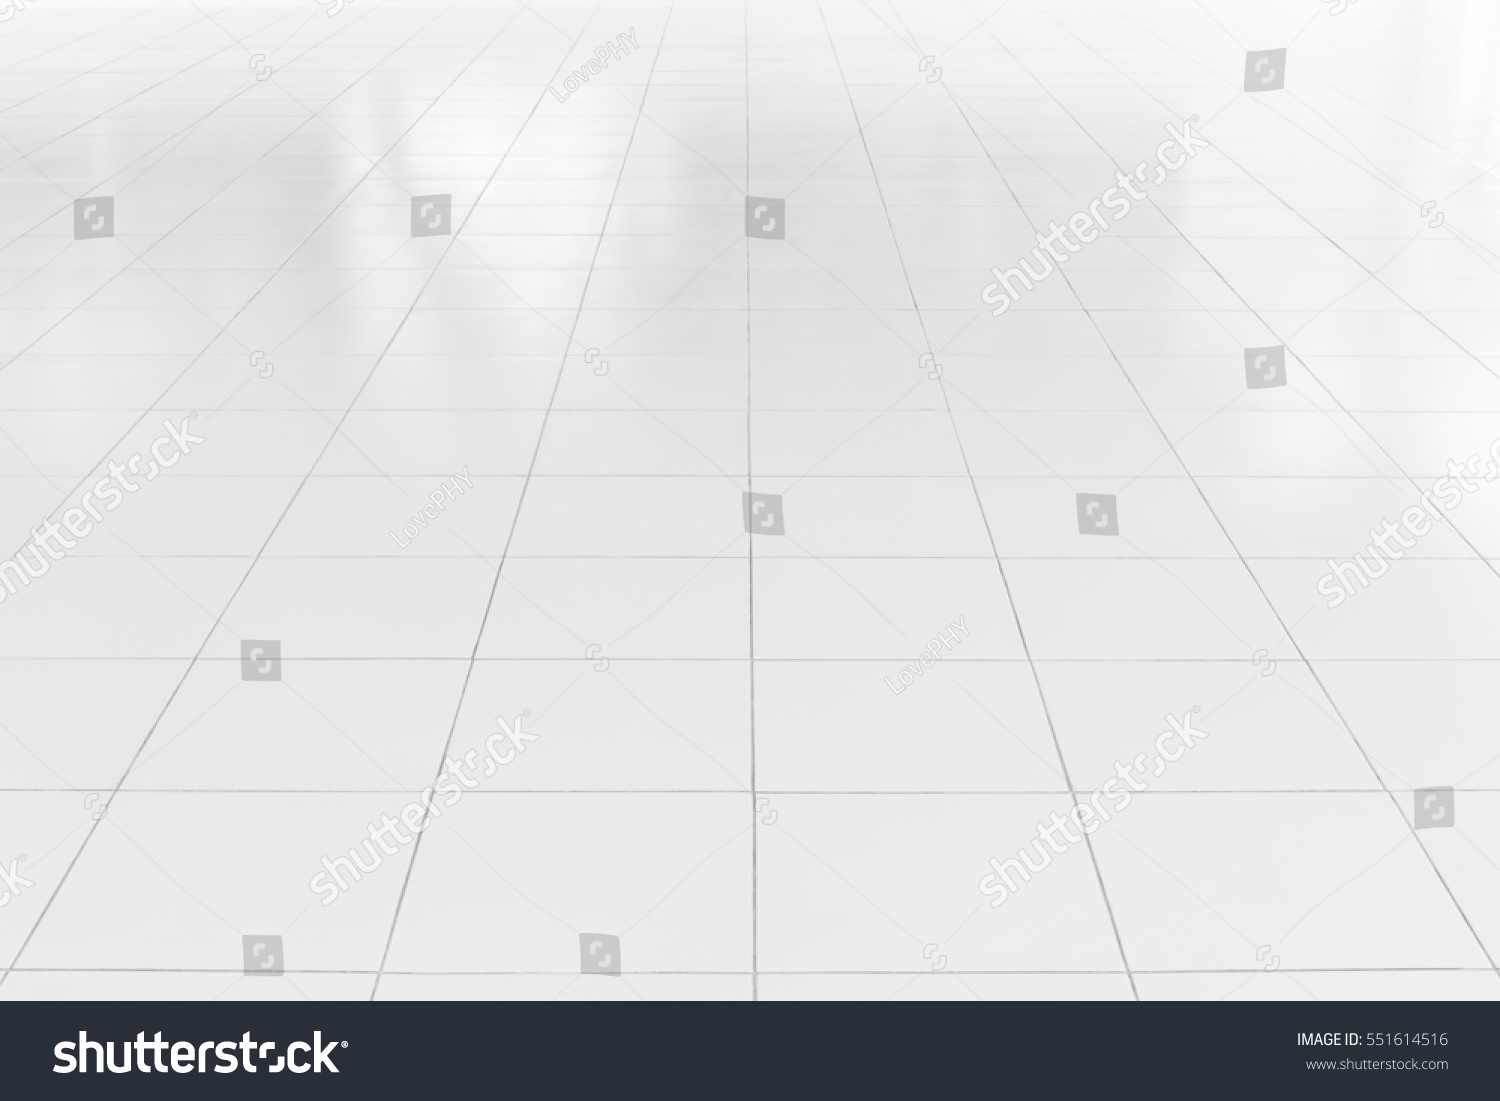 White tile floor background in perspective view. Clean surface and symmetry with grid line texture or pattern. For decoration in bathroom, kitchen and laundry room. #551614516